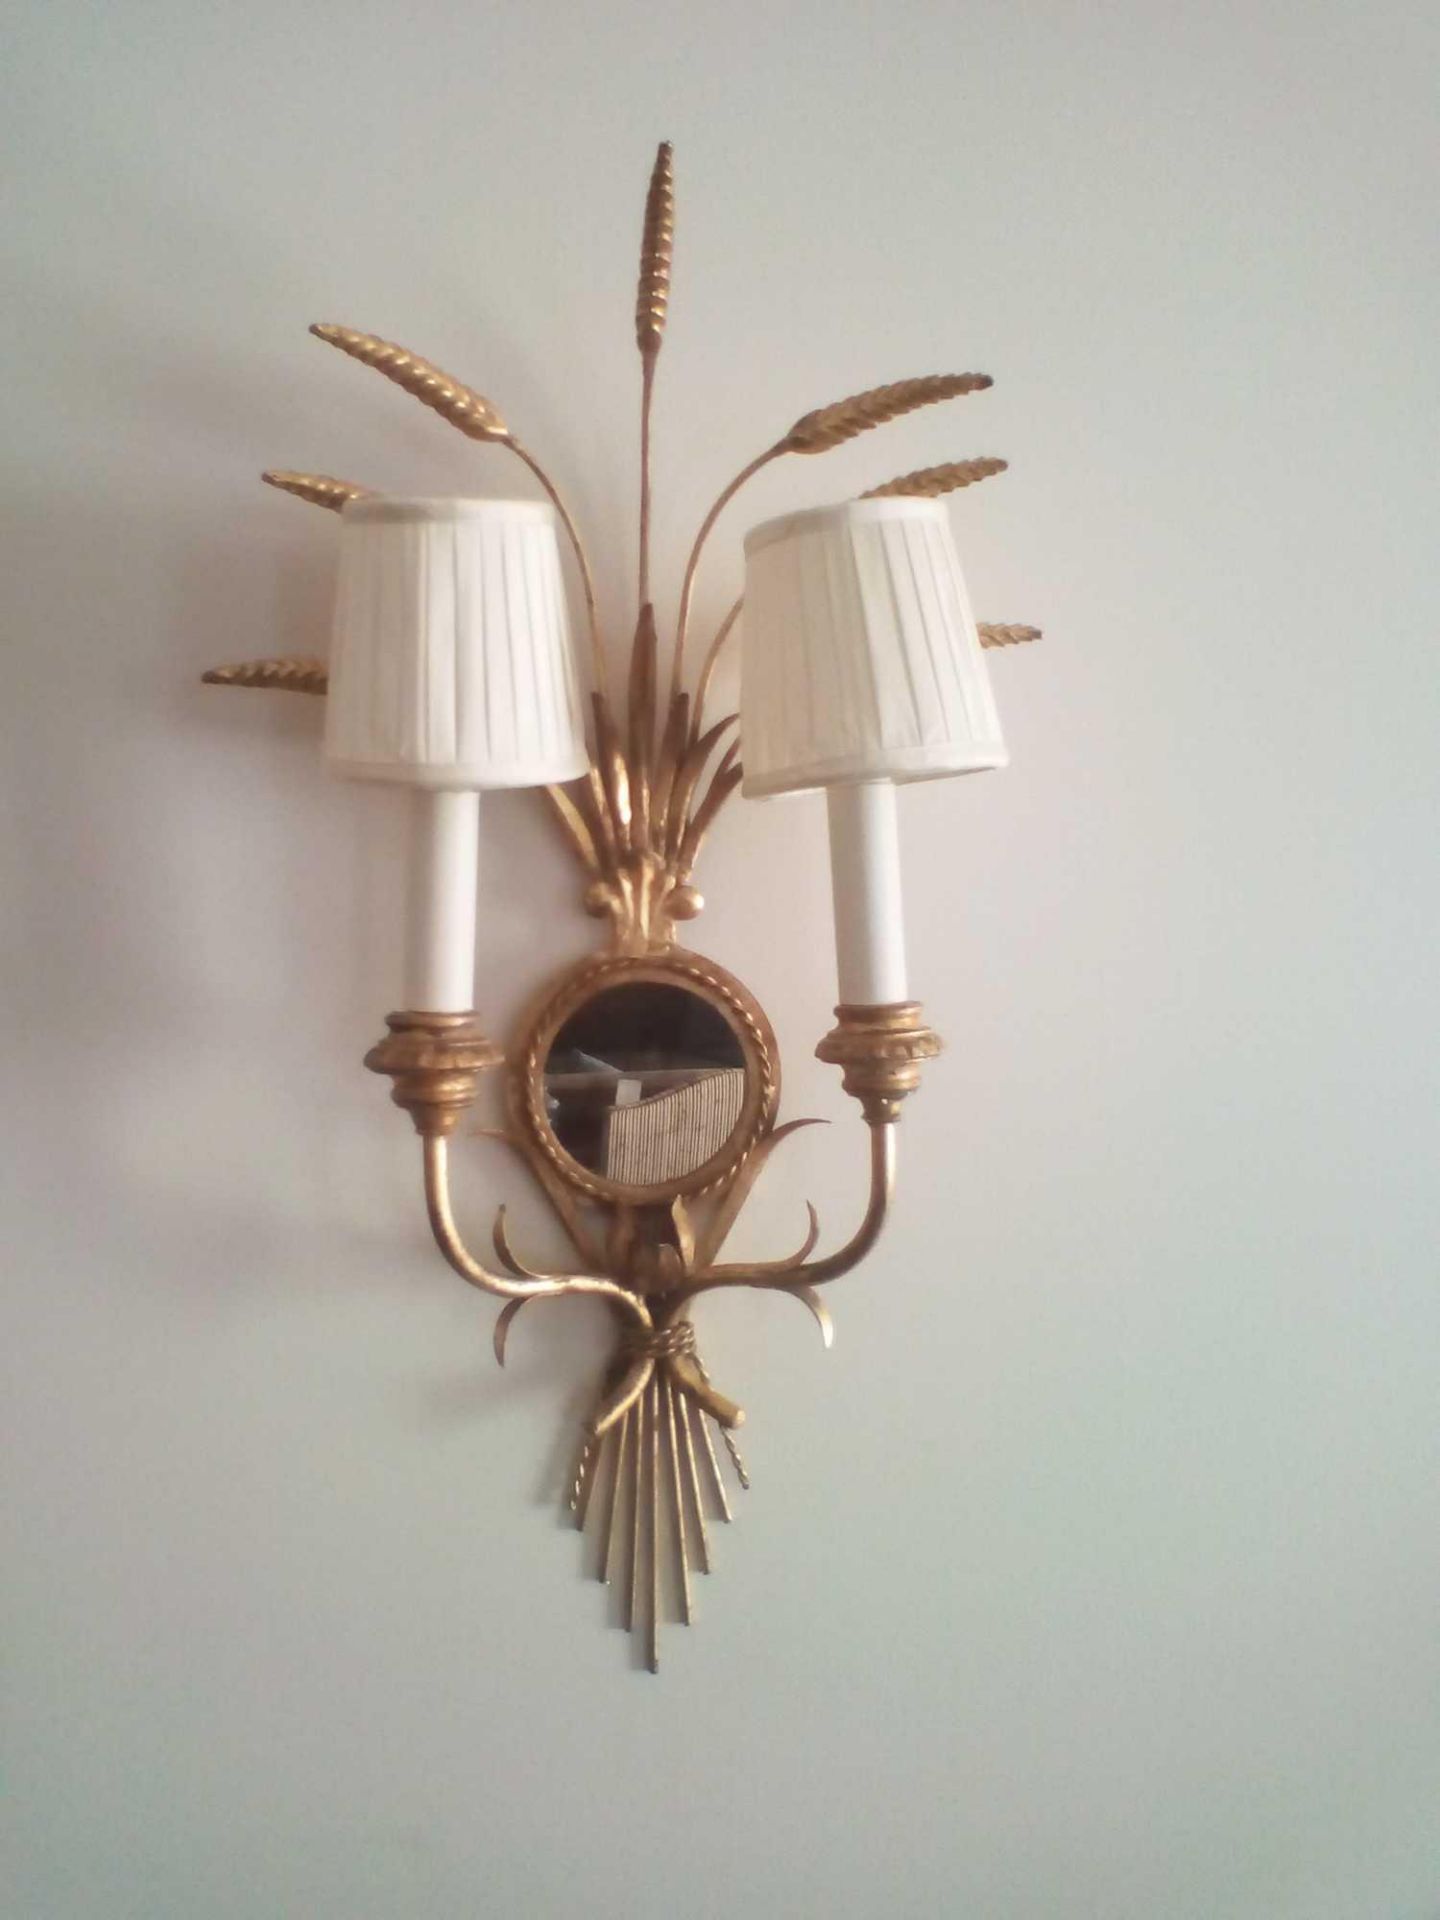 4 x Wall Appliques Twin Arm In A Elegant Wheatsheaf Motif And A Small Decorative Mirror Supported By - Bild 2 aus 2